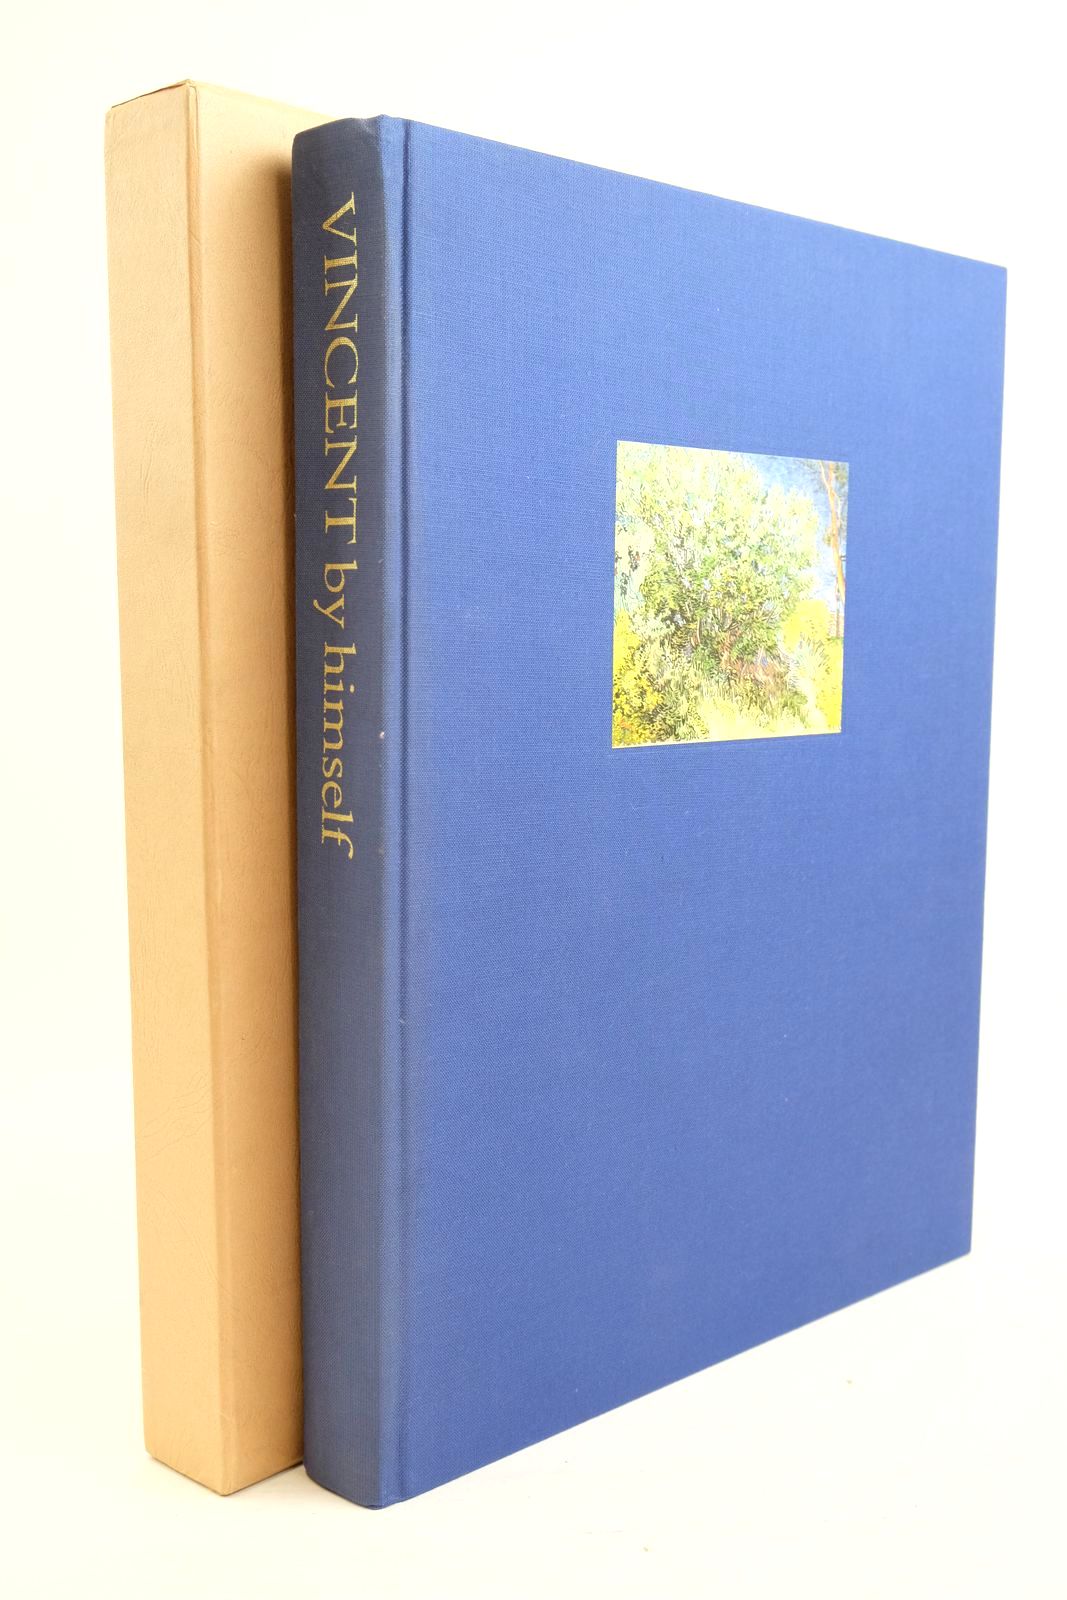 Photo of VINCENT BY HIMSELF written by Van Gogh, Vincent Bernard, Bruce illustrated by Van Gogh, Vincent published by Orbis Publishing (STOCK CODE: 1320948)  for sale by Stella & Rose's Books